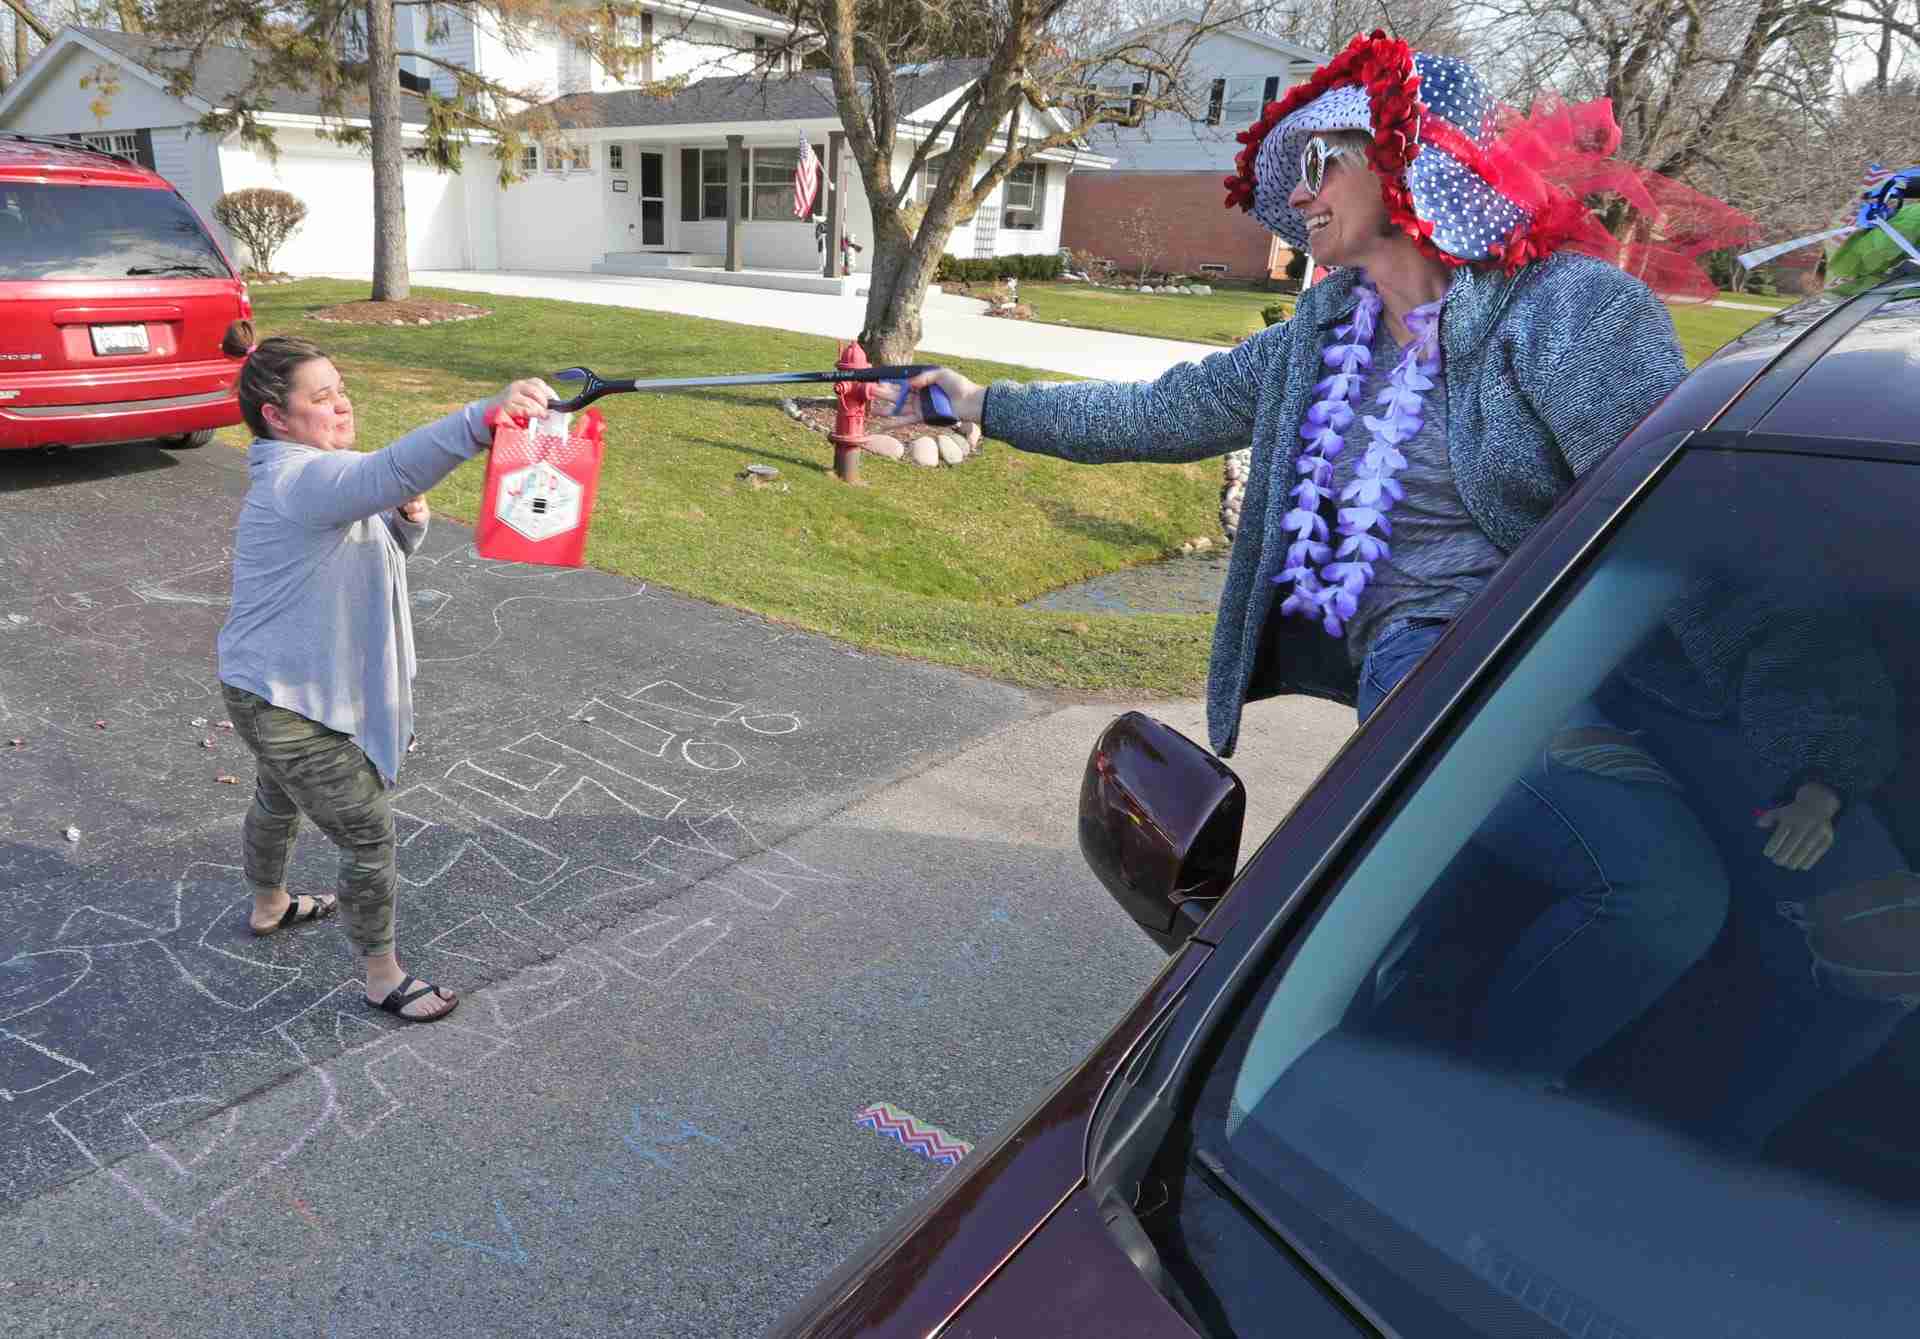 Becky Kops, right, uses a picker to hand her friend, Dajen Bohachek, a present as friends of Bohachek, of Bayside, held a social distance drive by birthday party for her during the coronavirus to celebrate her 44th birthday in Bayside, Wis. on Friday, April 3, 2020. The group decorated their vehicles at the Fox Point Village Hall before heading to Bohachek’s home to celebrate from the road. The stay at home order and the necessity to stay socially distant from each other has inspired creative ways for people to connect. 